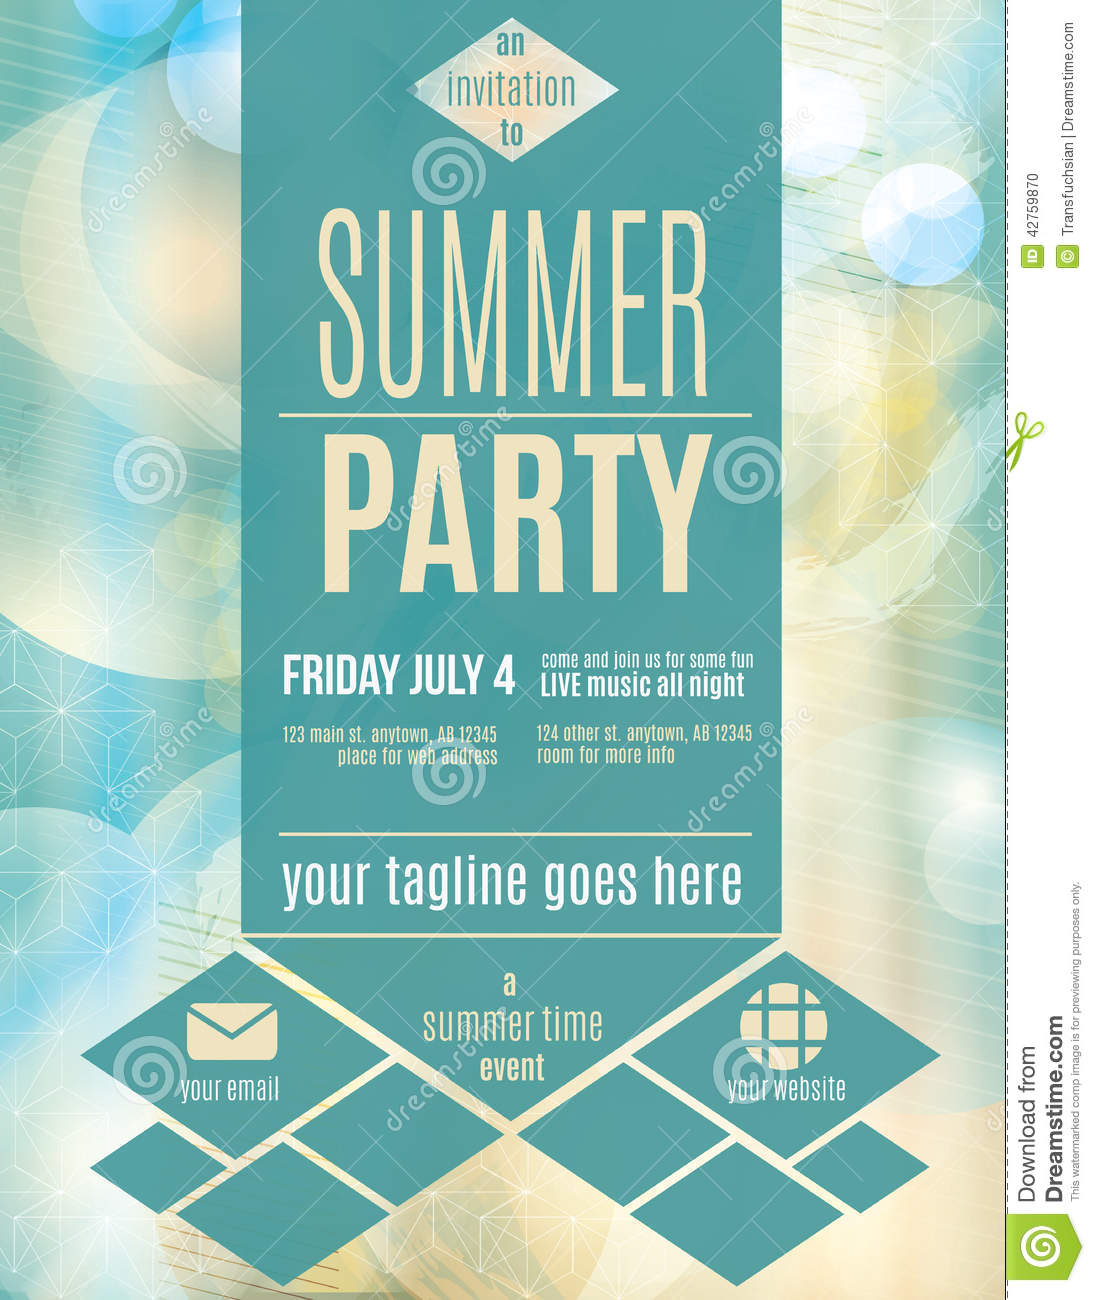 Modern Style Summer Party Flyer Template Stock Vector  For Party Invitation Flyer Template Regarding Party Invitation Flyer Template